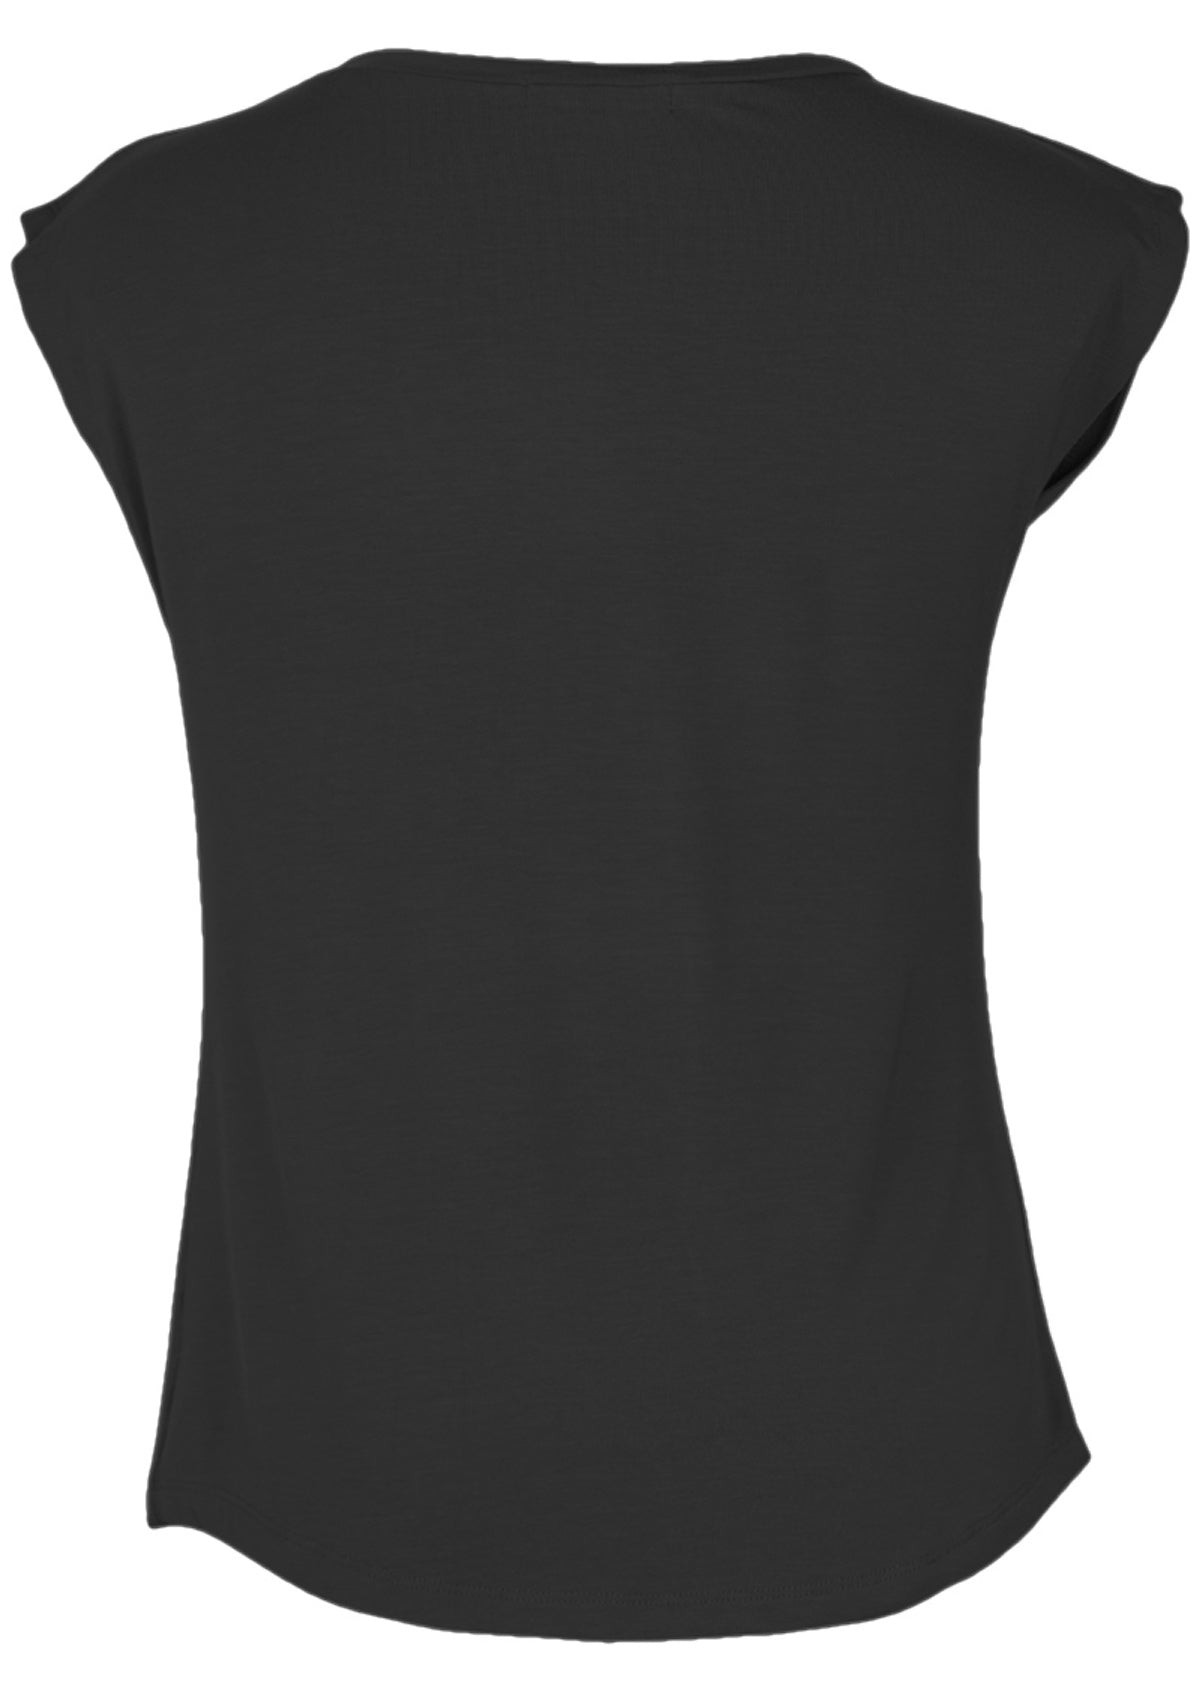 Back view of women's black v-neck short cap sleeve rayon top